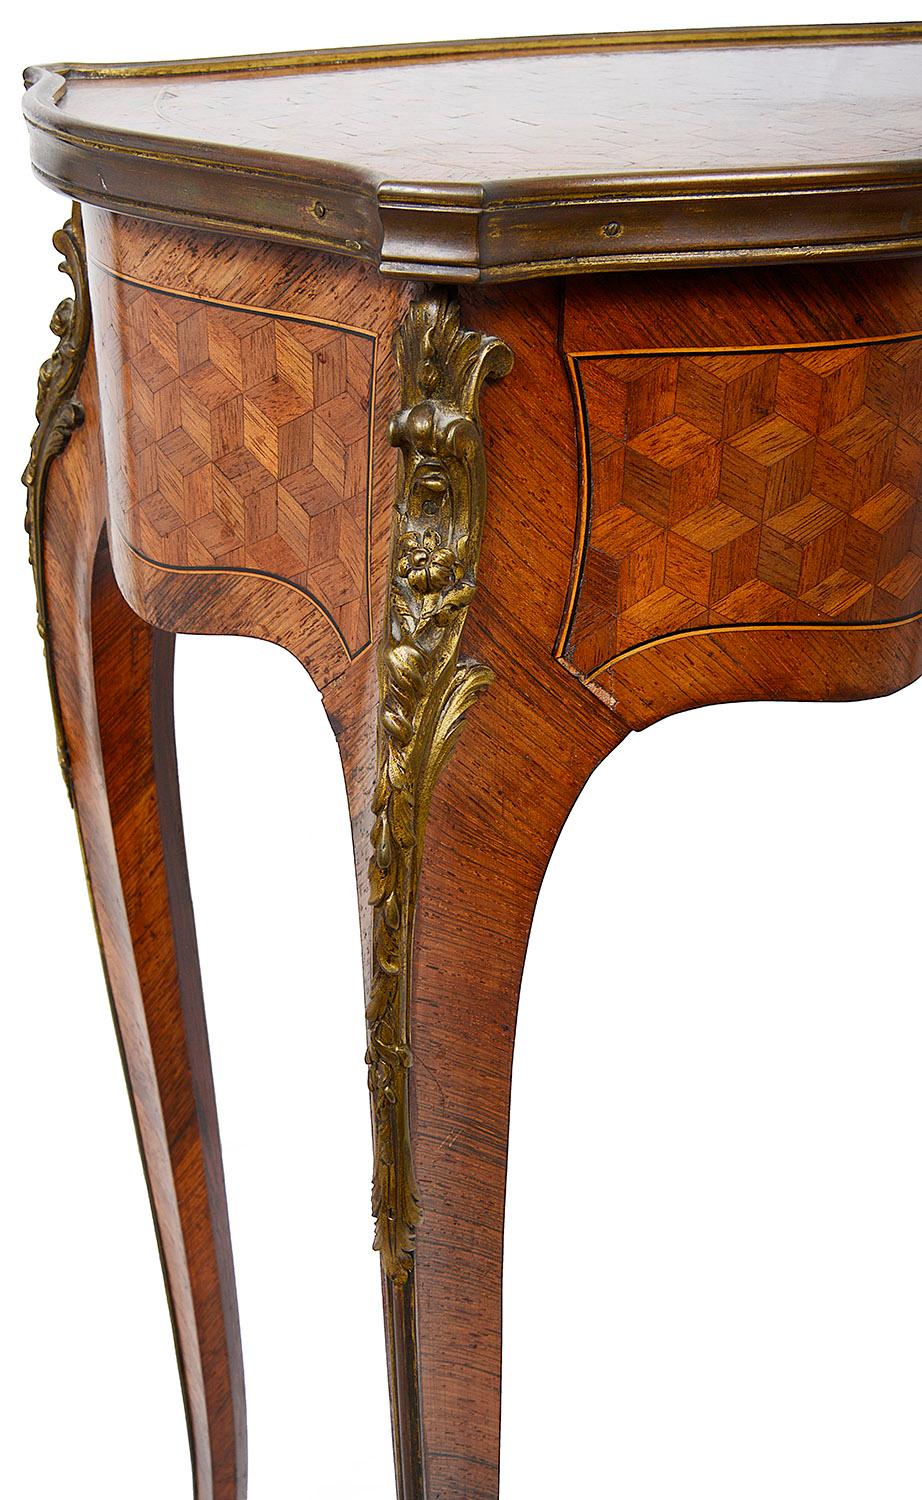 A fine quality late 19th century French freestanding Parquetry inlaid side table, having serpentine shaping to all sides, with a single oak lined frieze drawer, a gilded ormolu shell like escutcheon and matching mount to the reverse, raised on